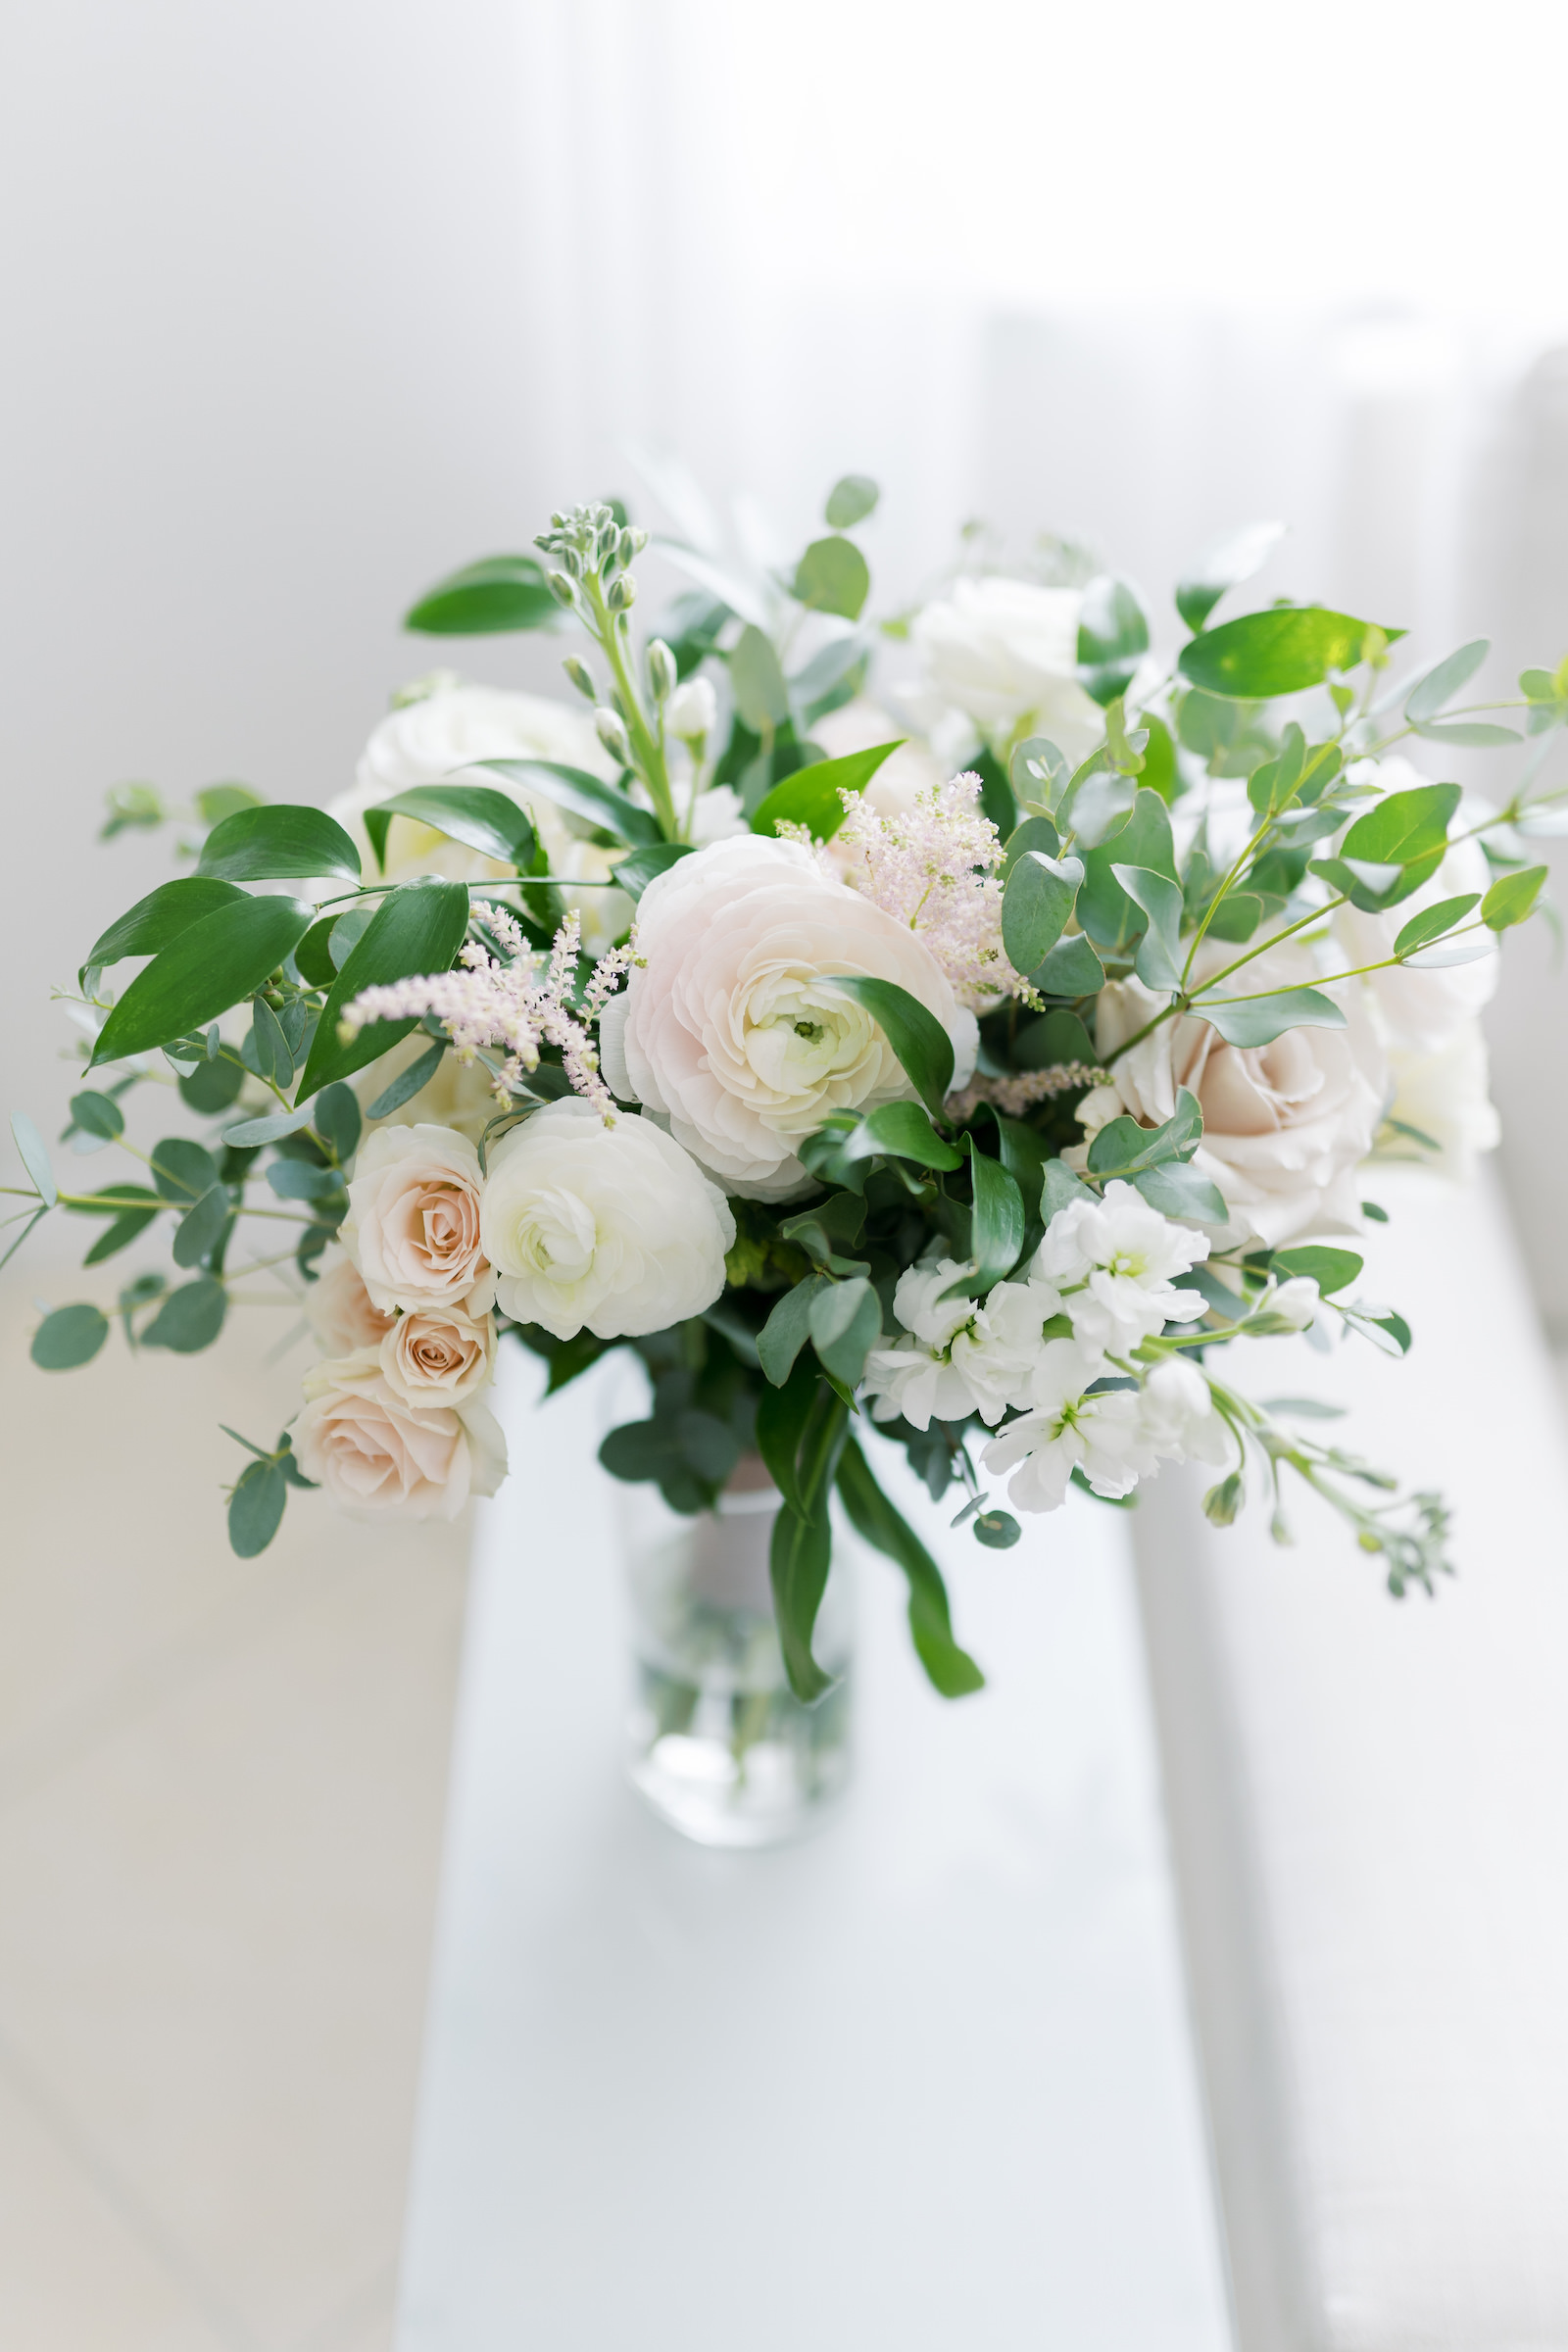 Peonies and Ranunculus Floral Wedding Bouquet with Greenery